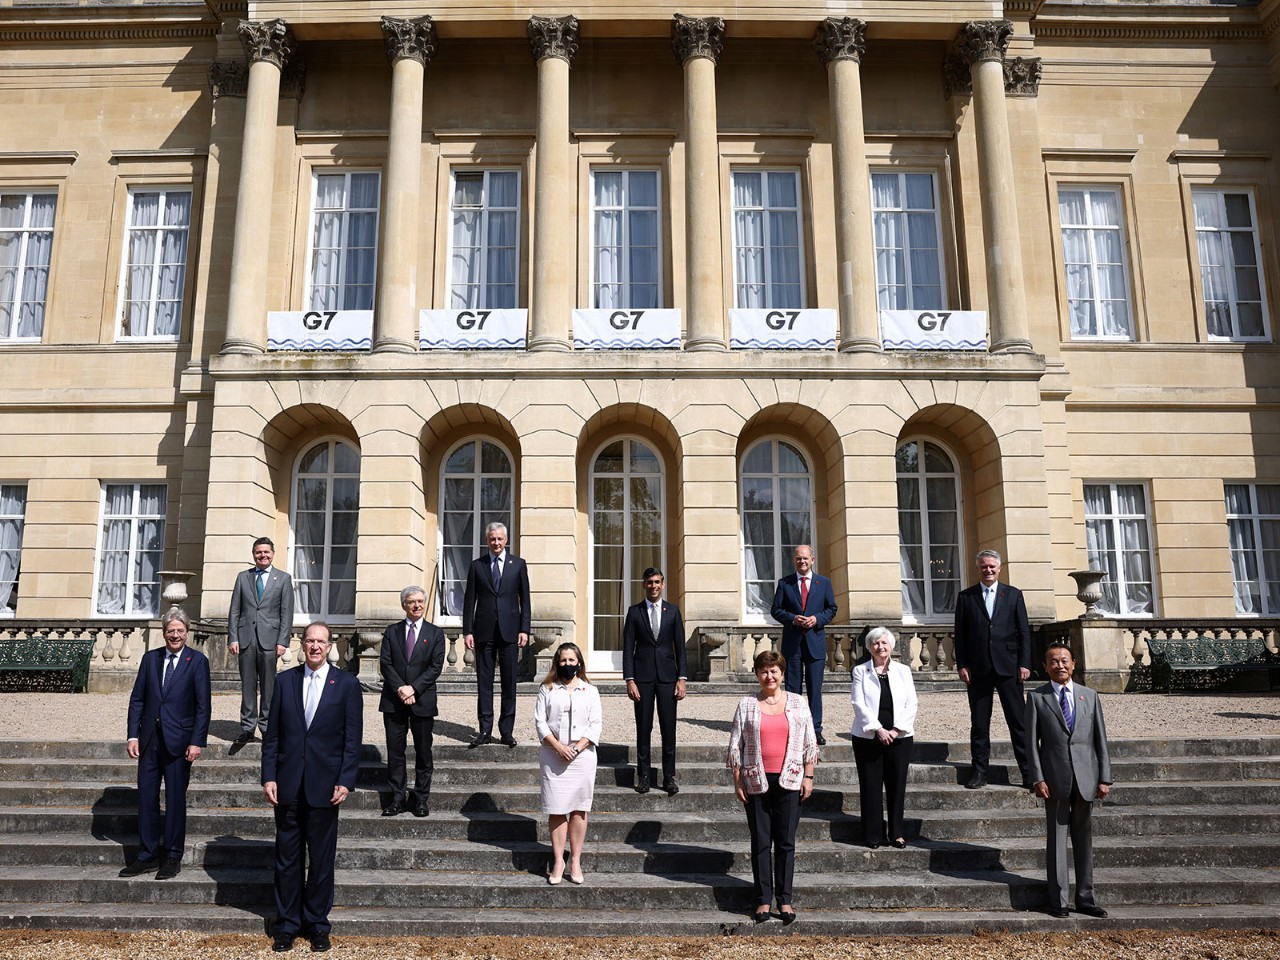 The issue of a global minimum corporation tax rate dominated the meeting of finance and economic officials from the G7 nations in London in June